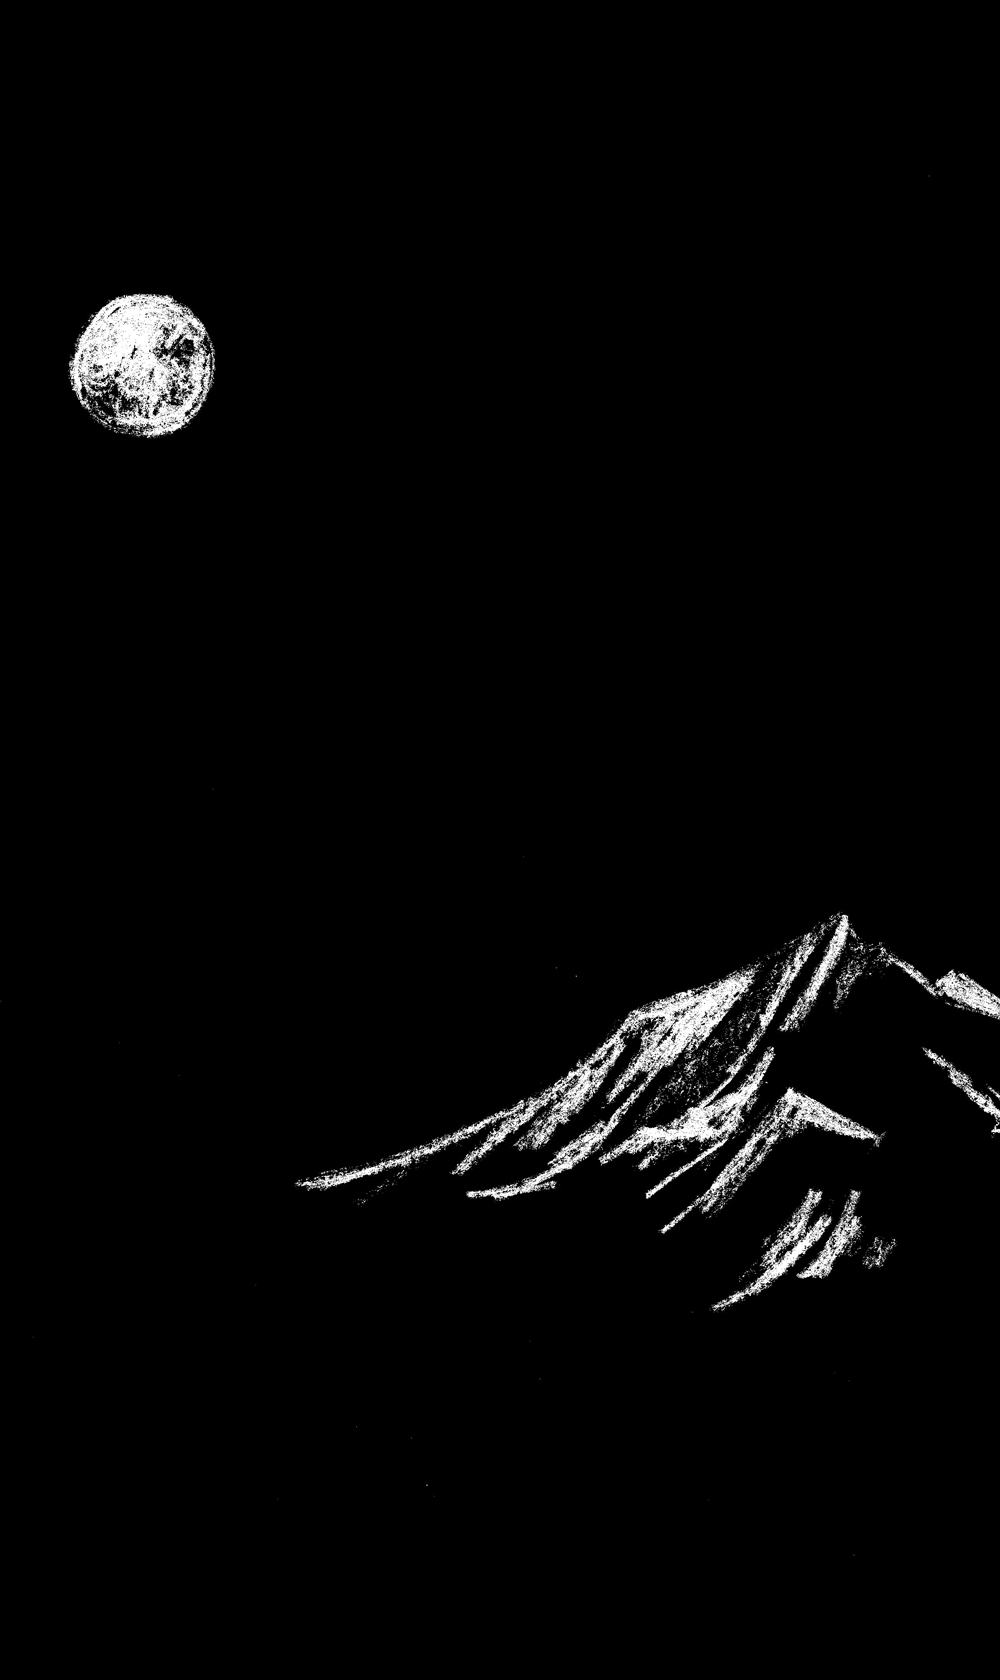 Artwork by Leonie Brialey: in white chalk on a black background, a small solitary full moon to the left hanging over a small clump of mountains to the right 